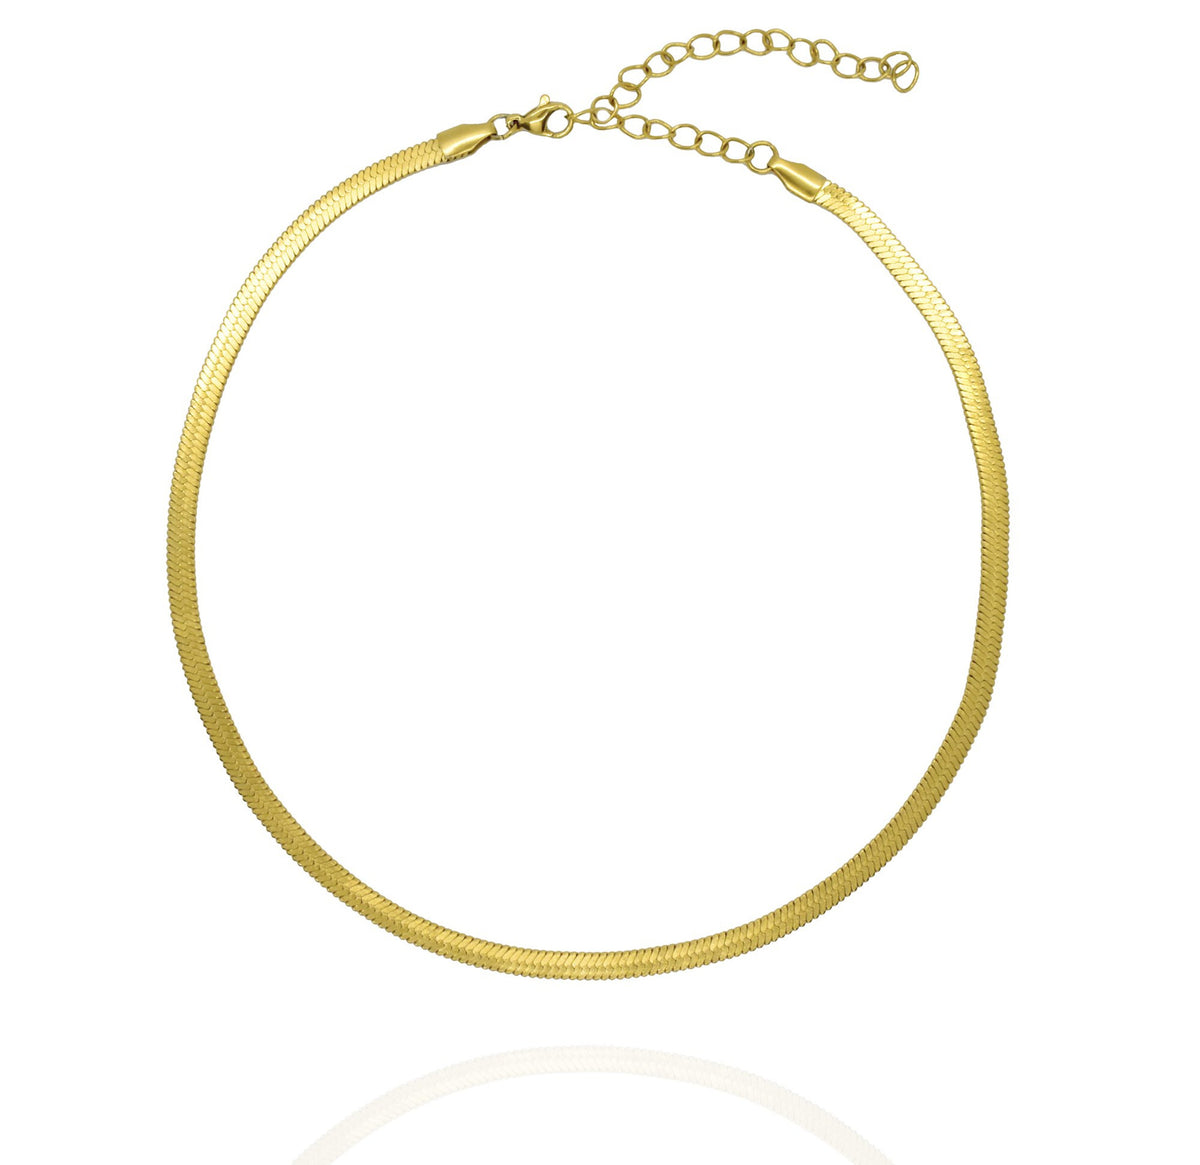 gold thin snake chain necklace waterproof jewelry